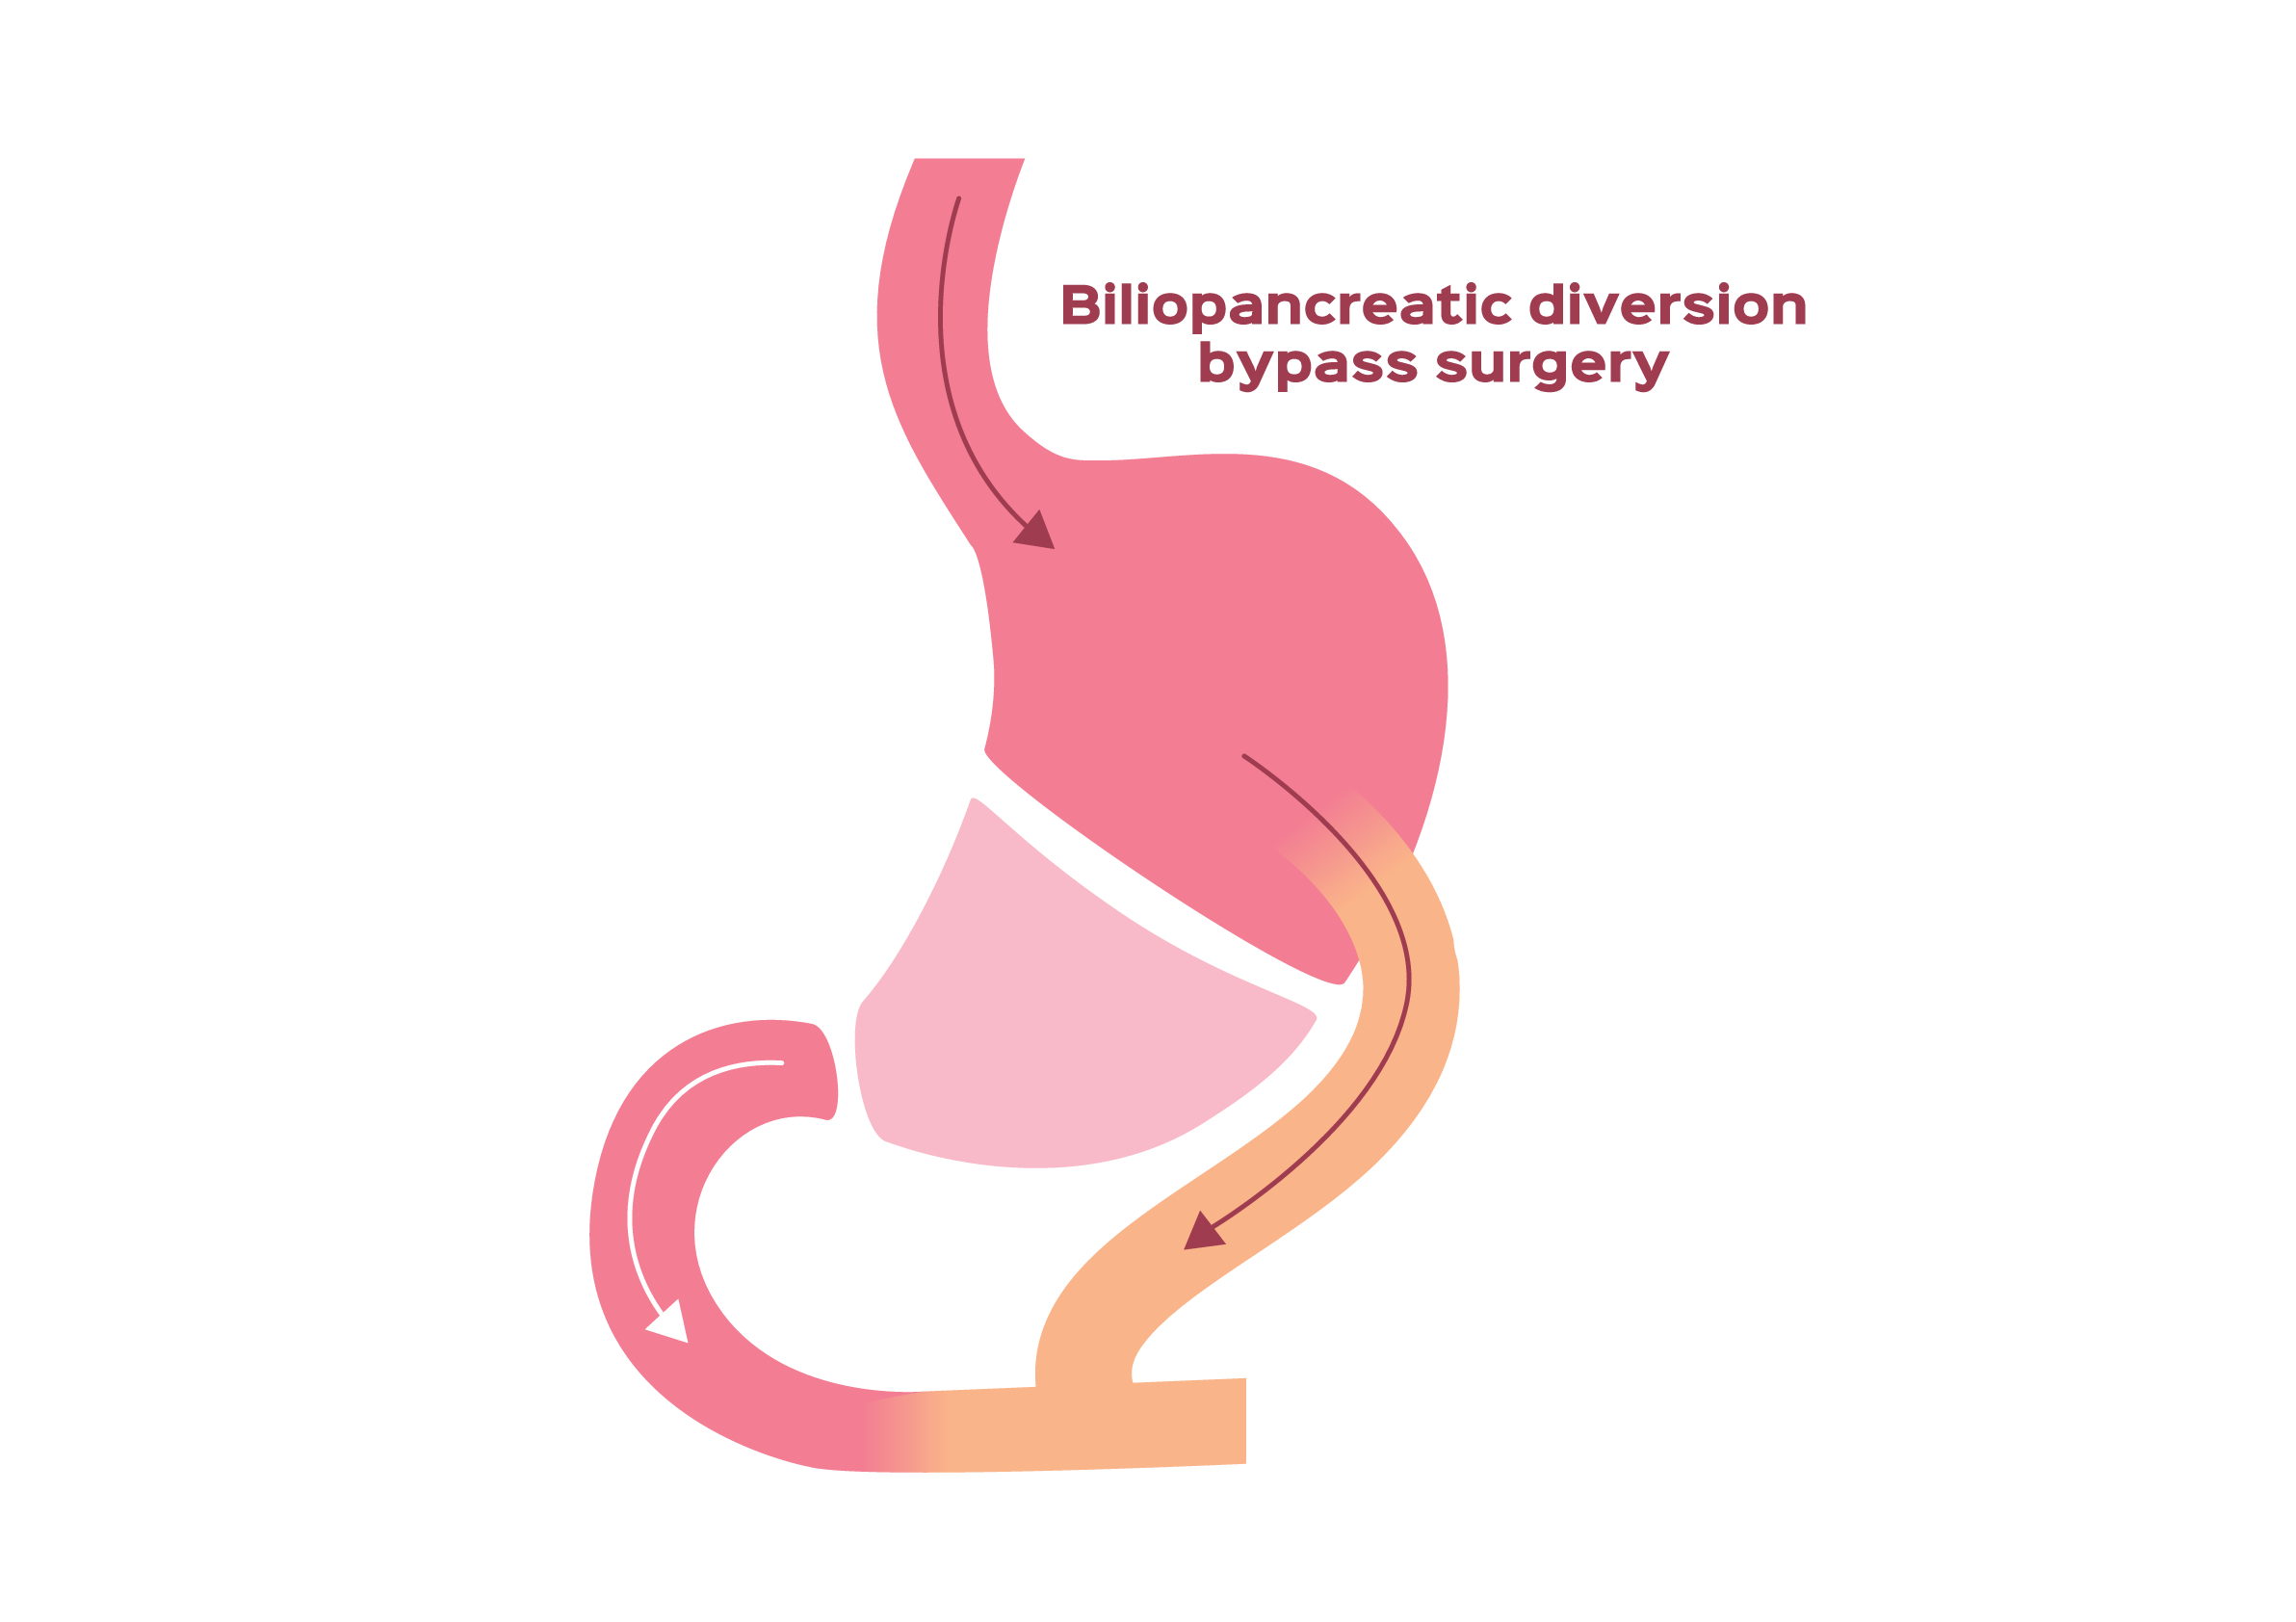 Illustration of how a person's stomach and small intestine are altered during a biliopancreatic diversion bybass surgery.